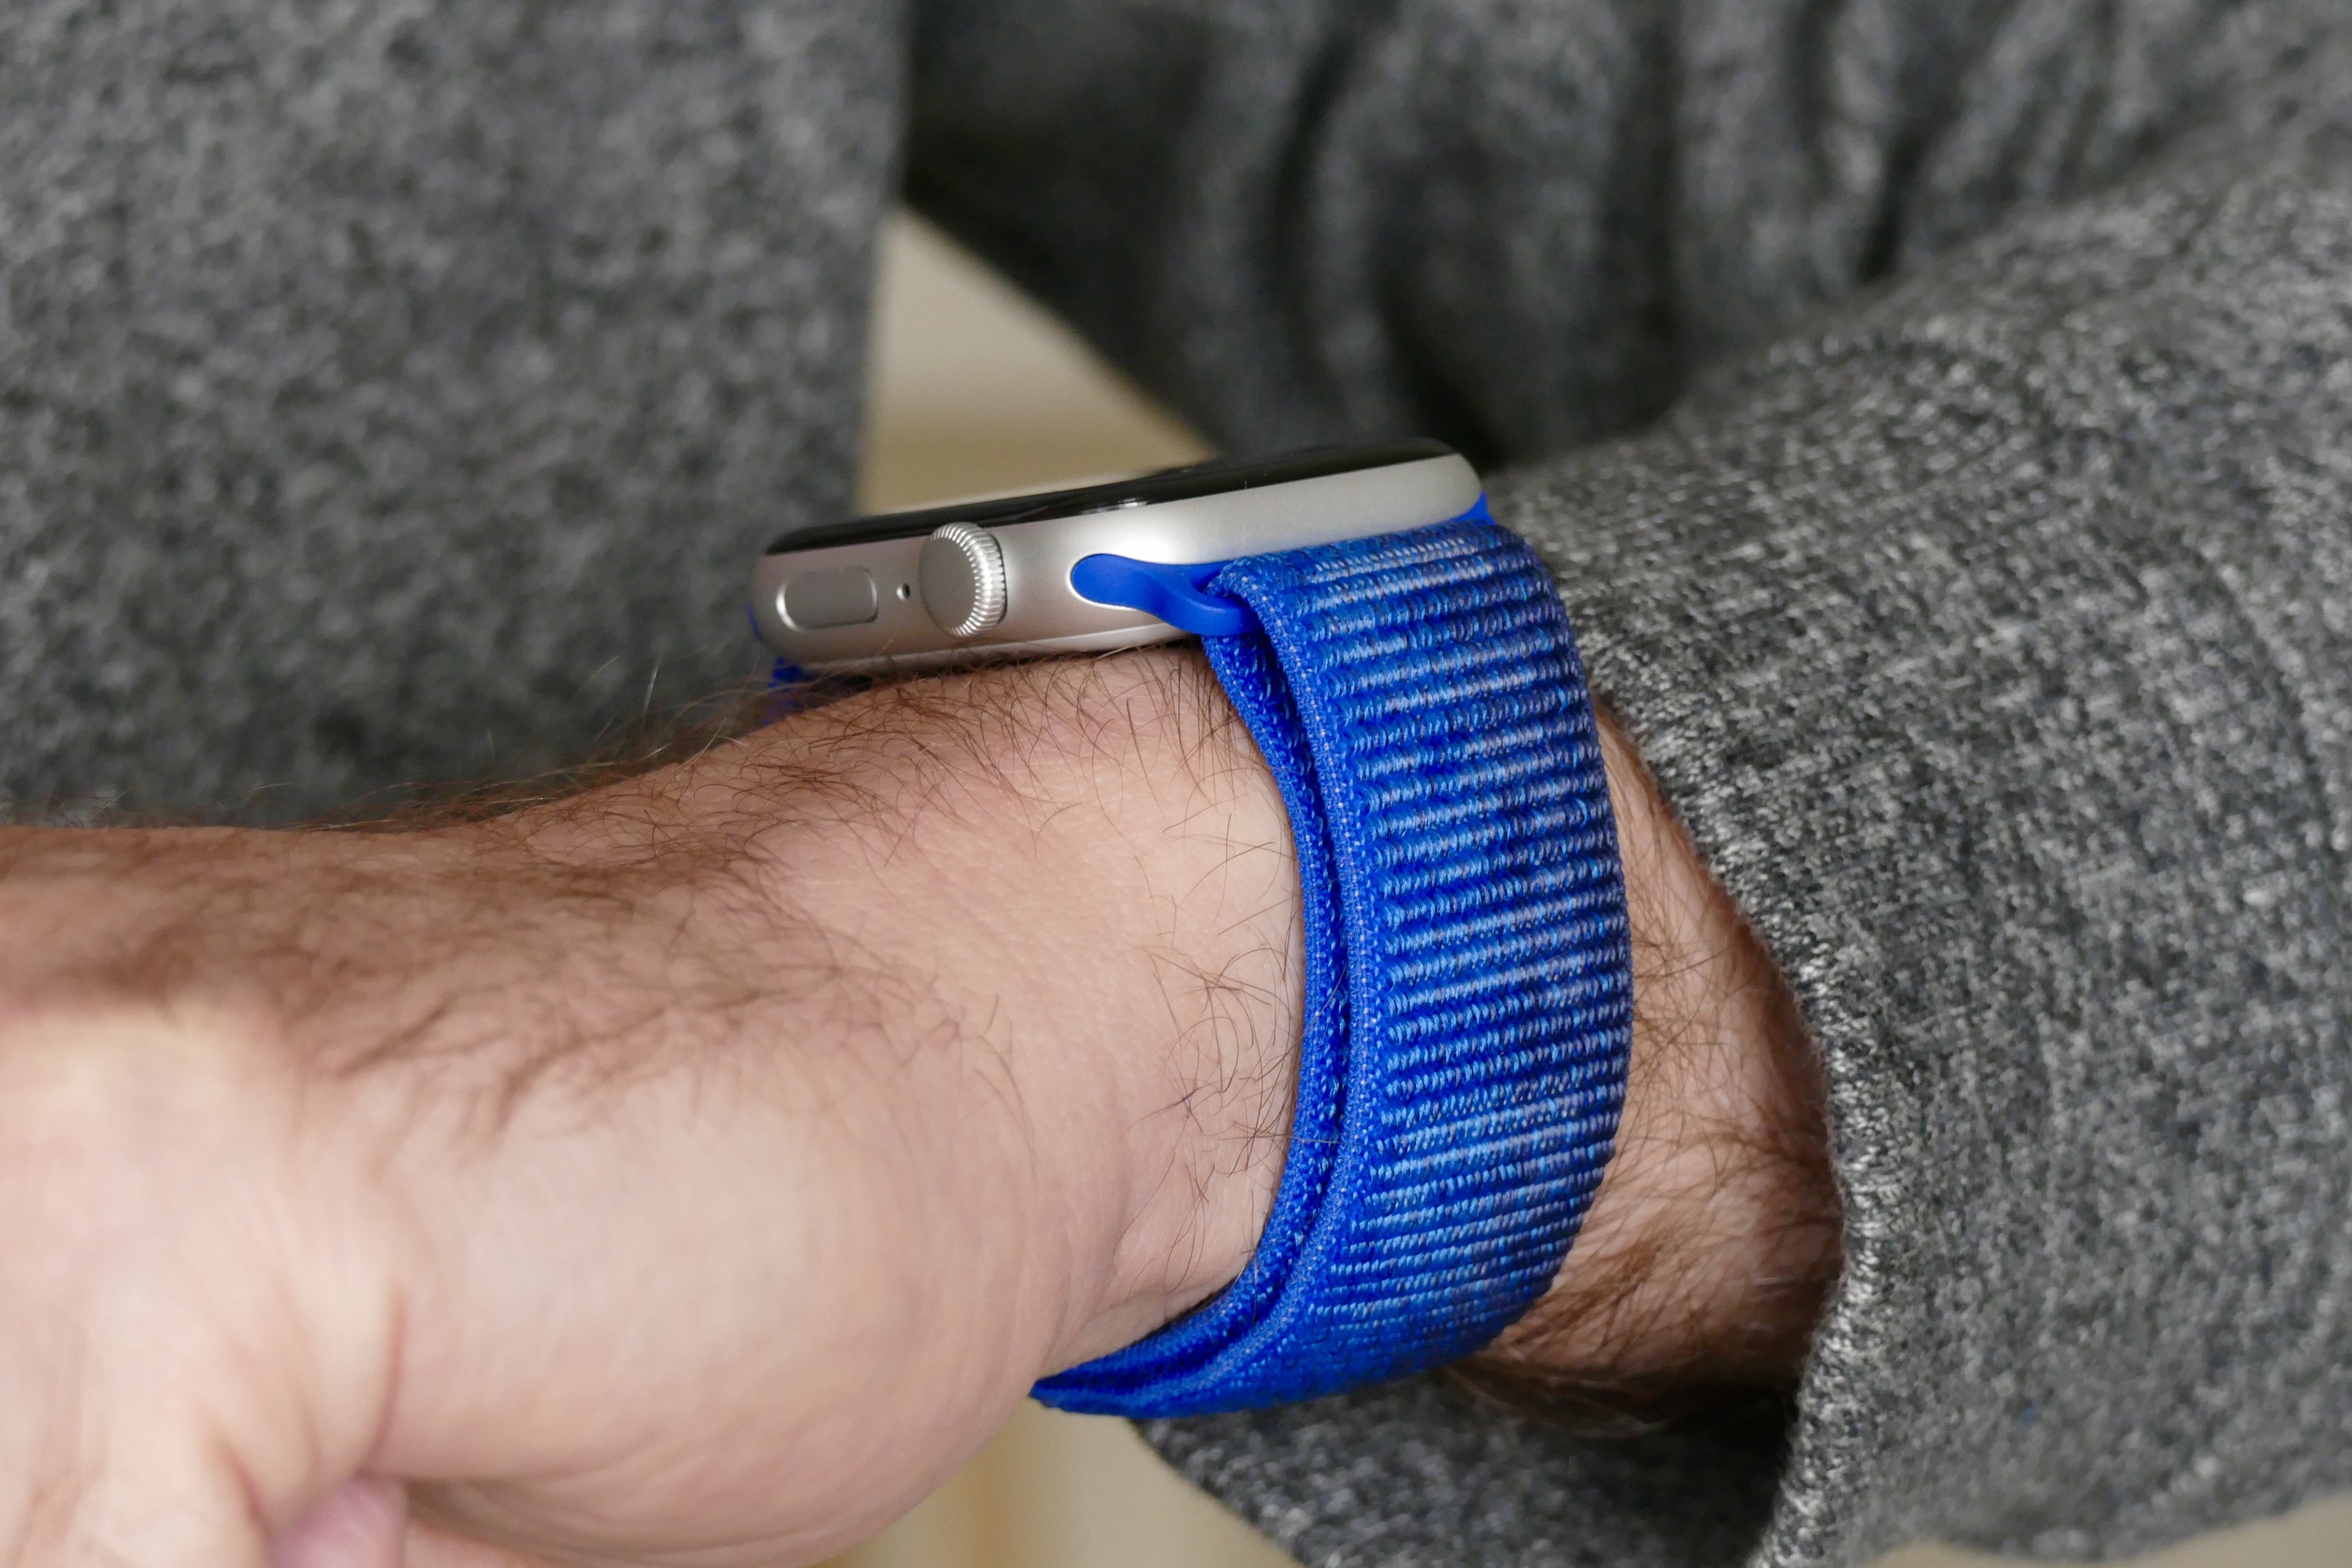 The side of the Apple Watch SE 2 being worn on a man's wrist.